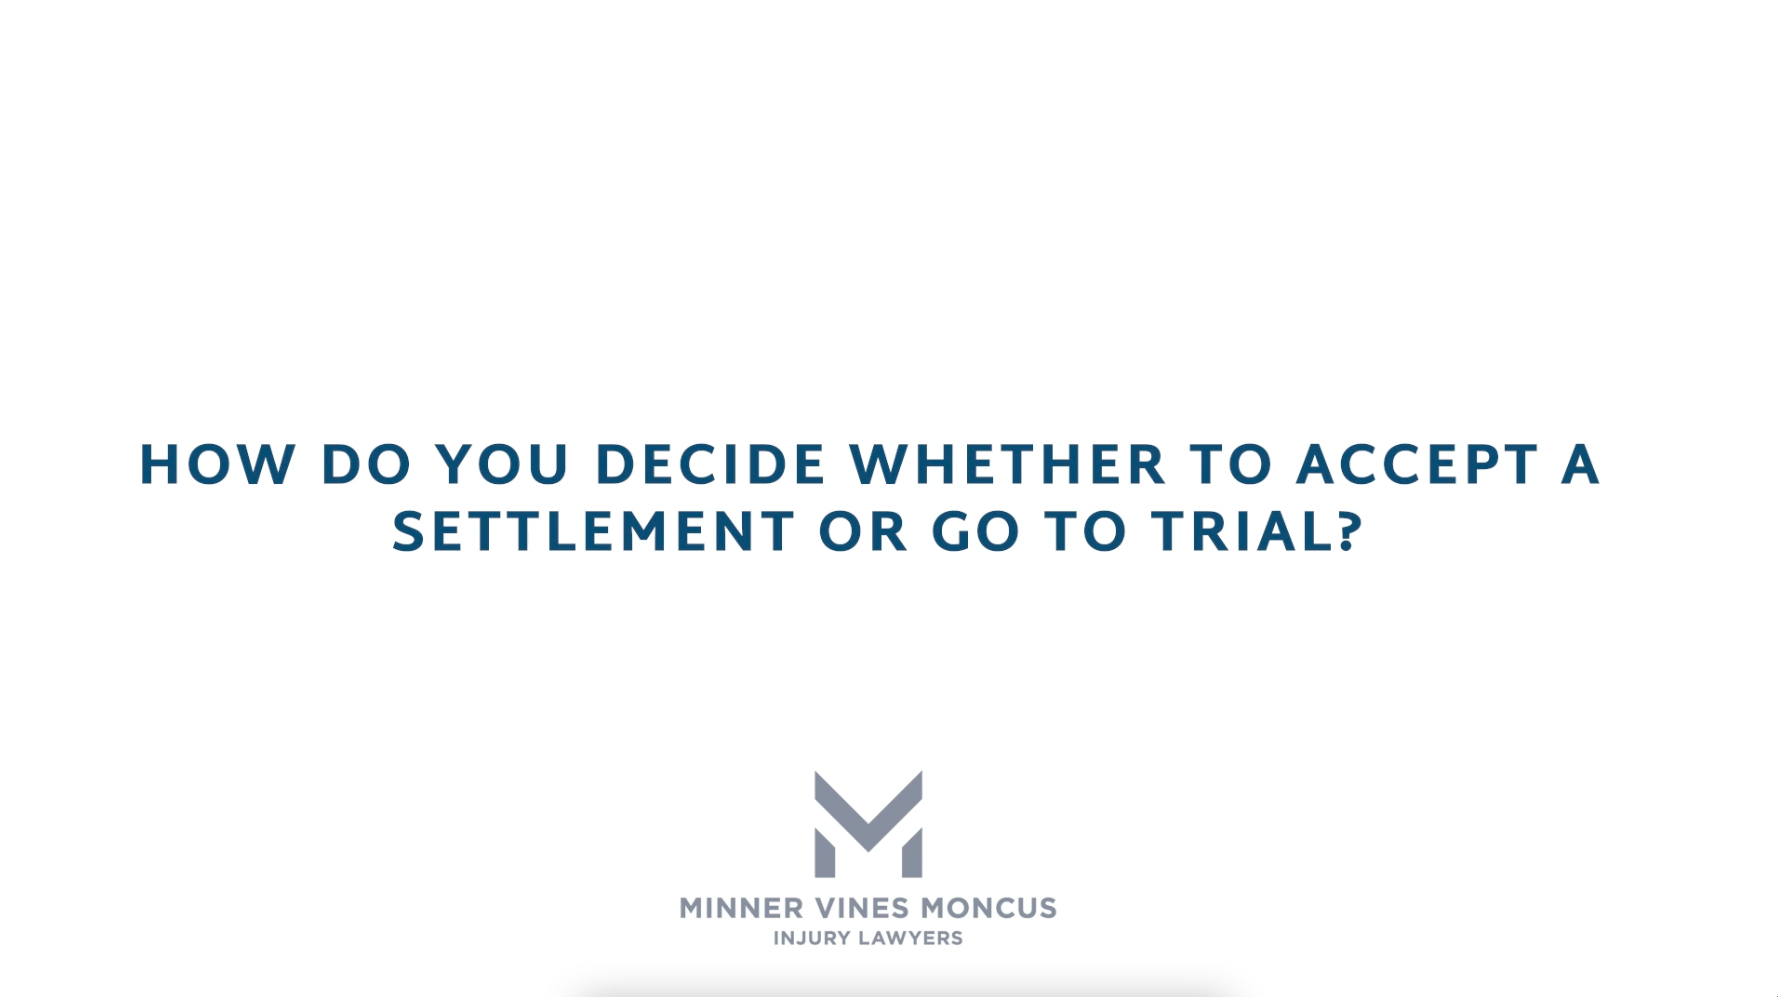 How do you decide whether to accept a settlement or go to trial?